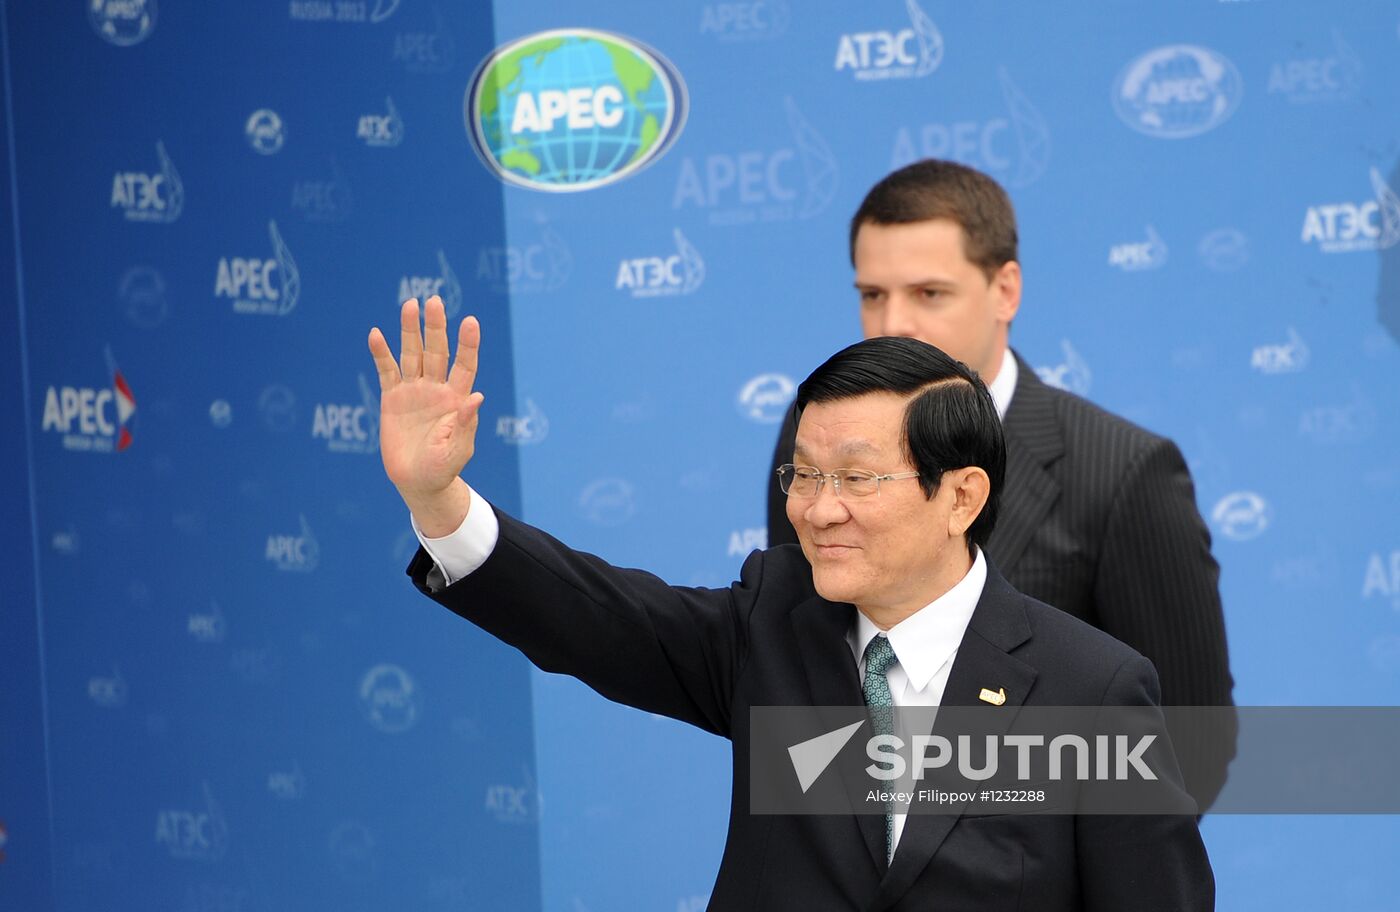 APEC leaders arrive for First APEC Economic Leaders' meeting